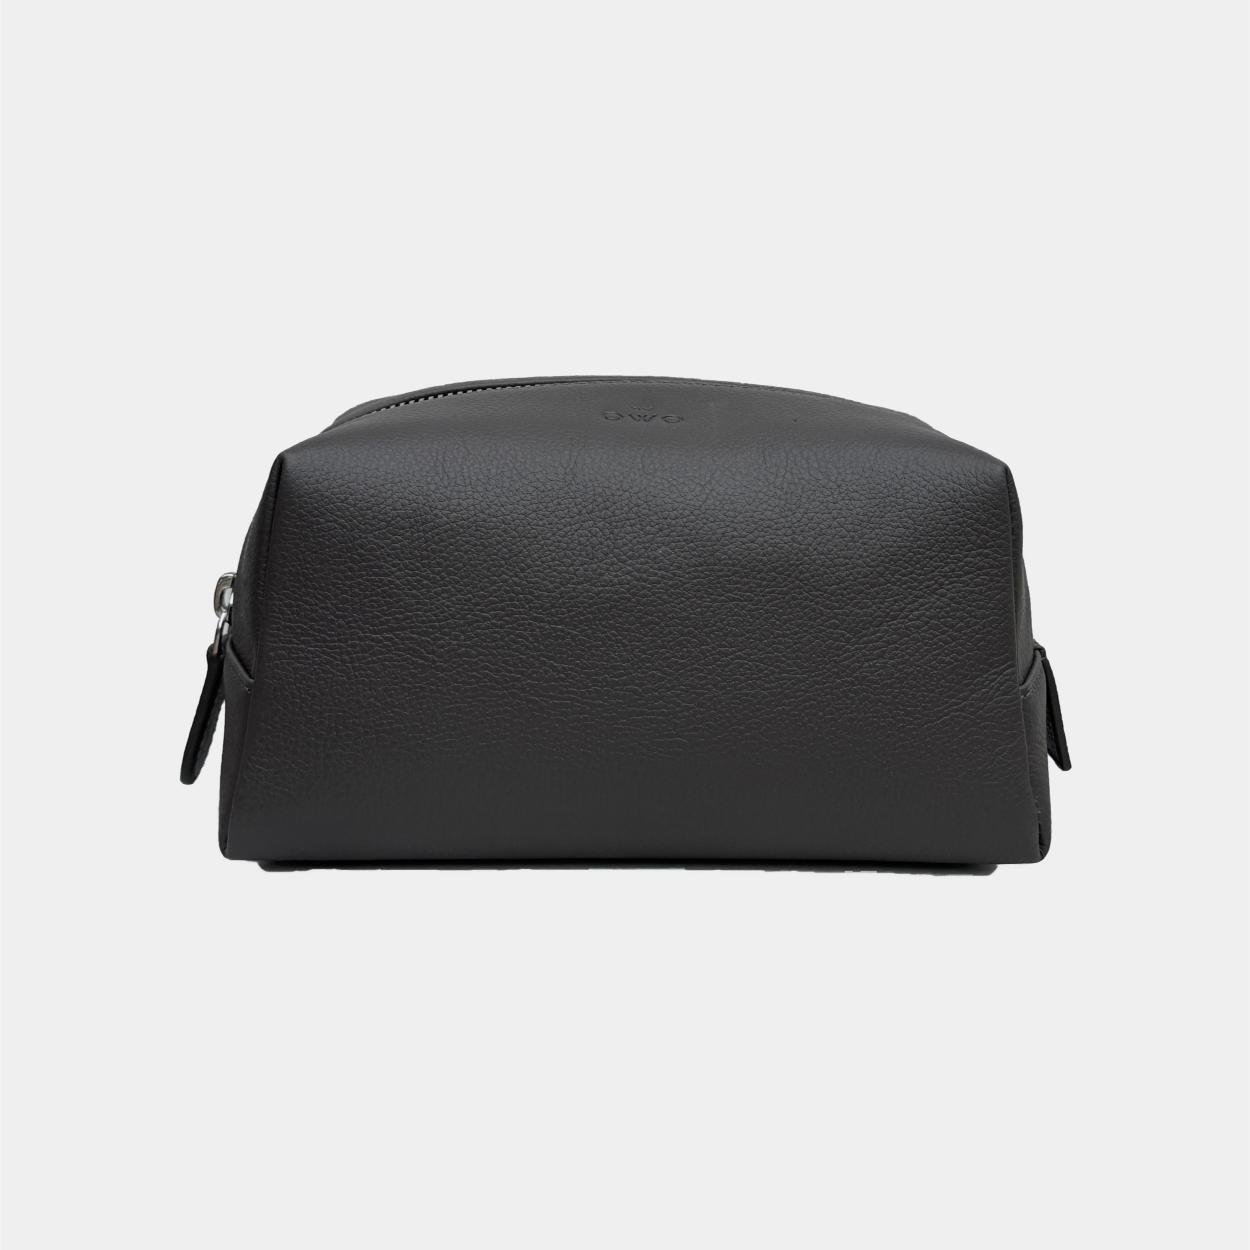 Medium leather wash bag designed for travelling, embossed with your company logo for corporate gifting.